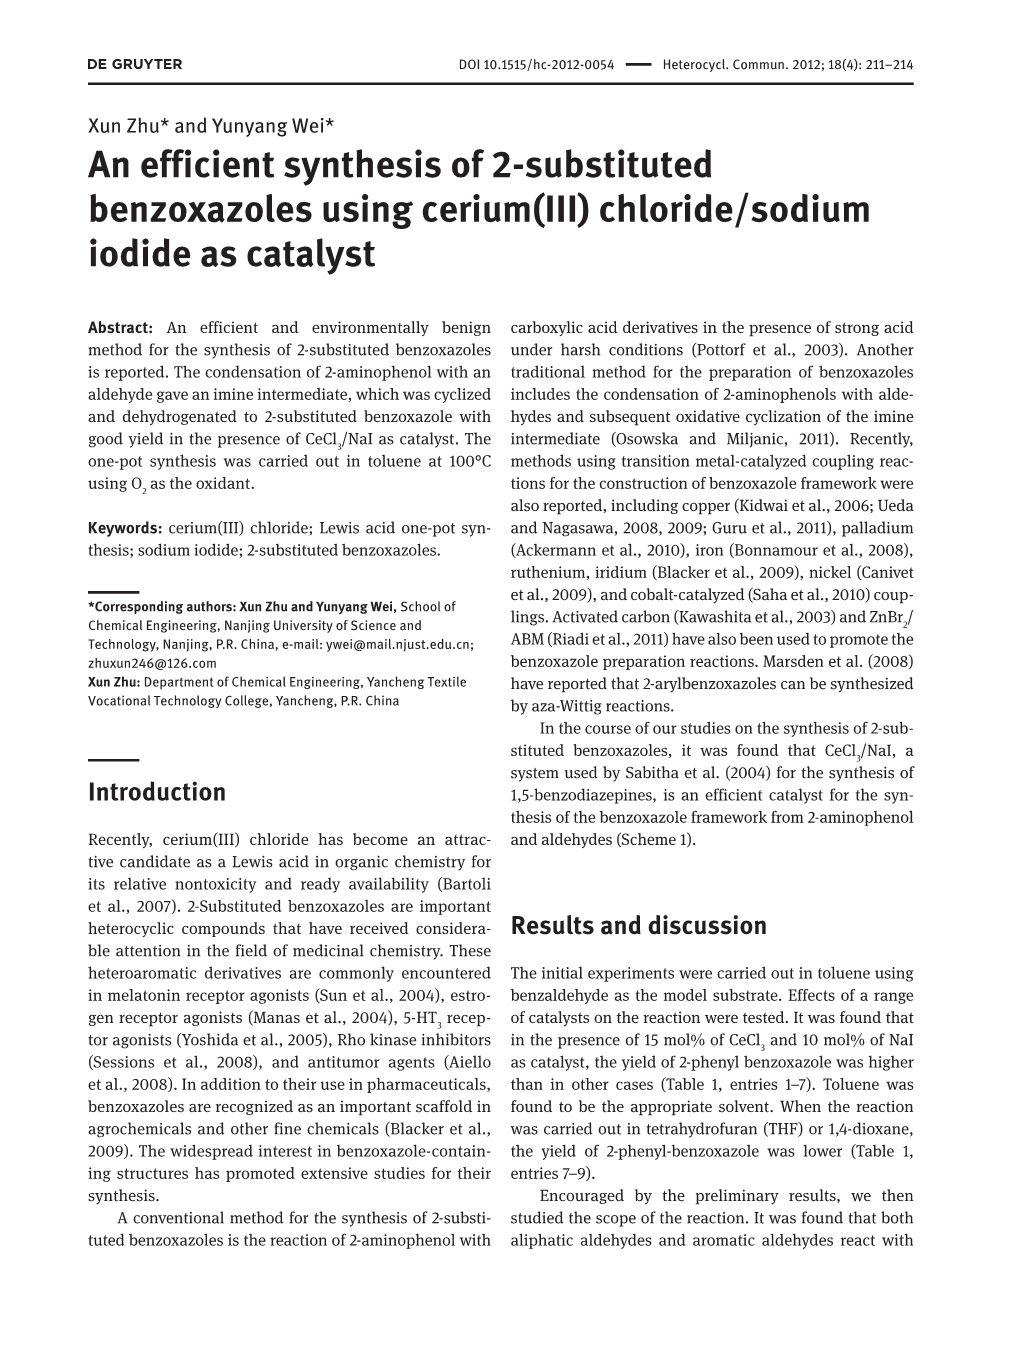 An Efficient Synthesis of 2-Substituted Benzoxazoles Using Cerium(III) Chloride/Sodium Iodide As Catalyst